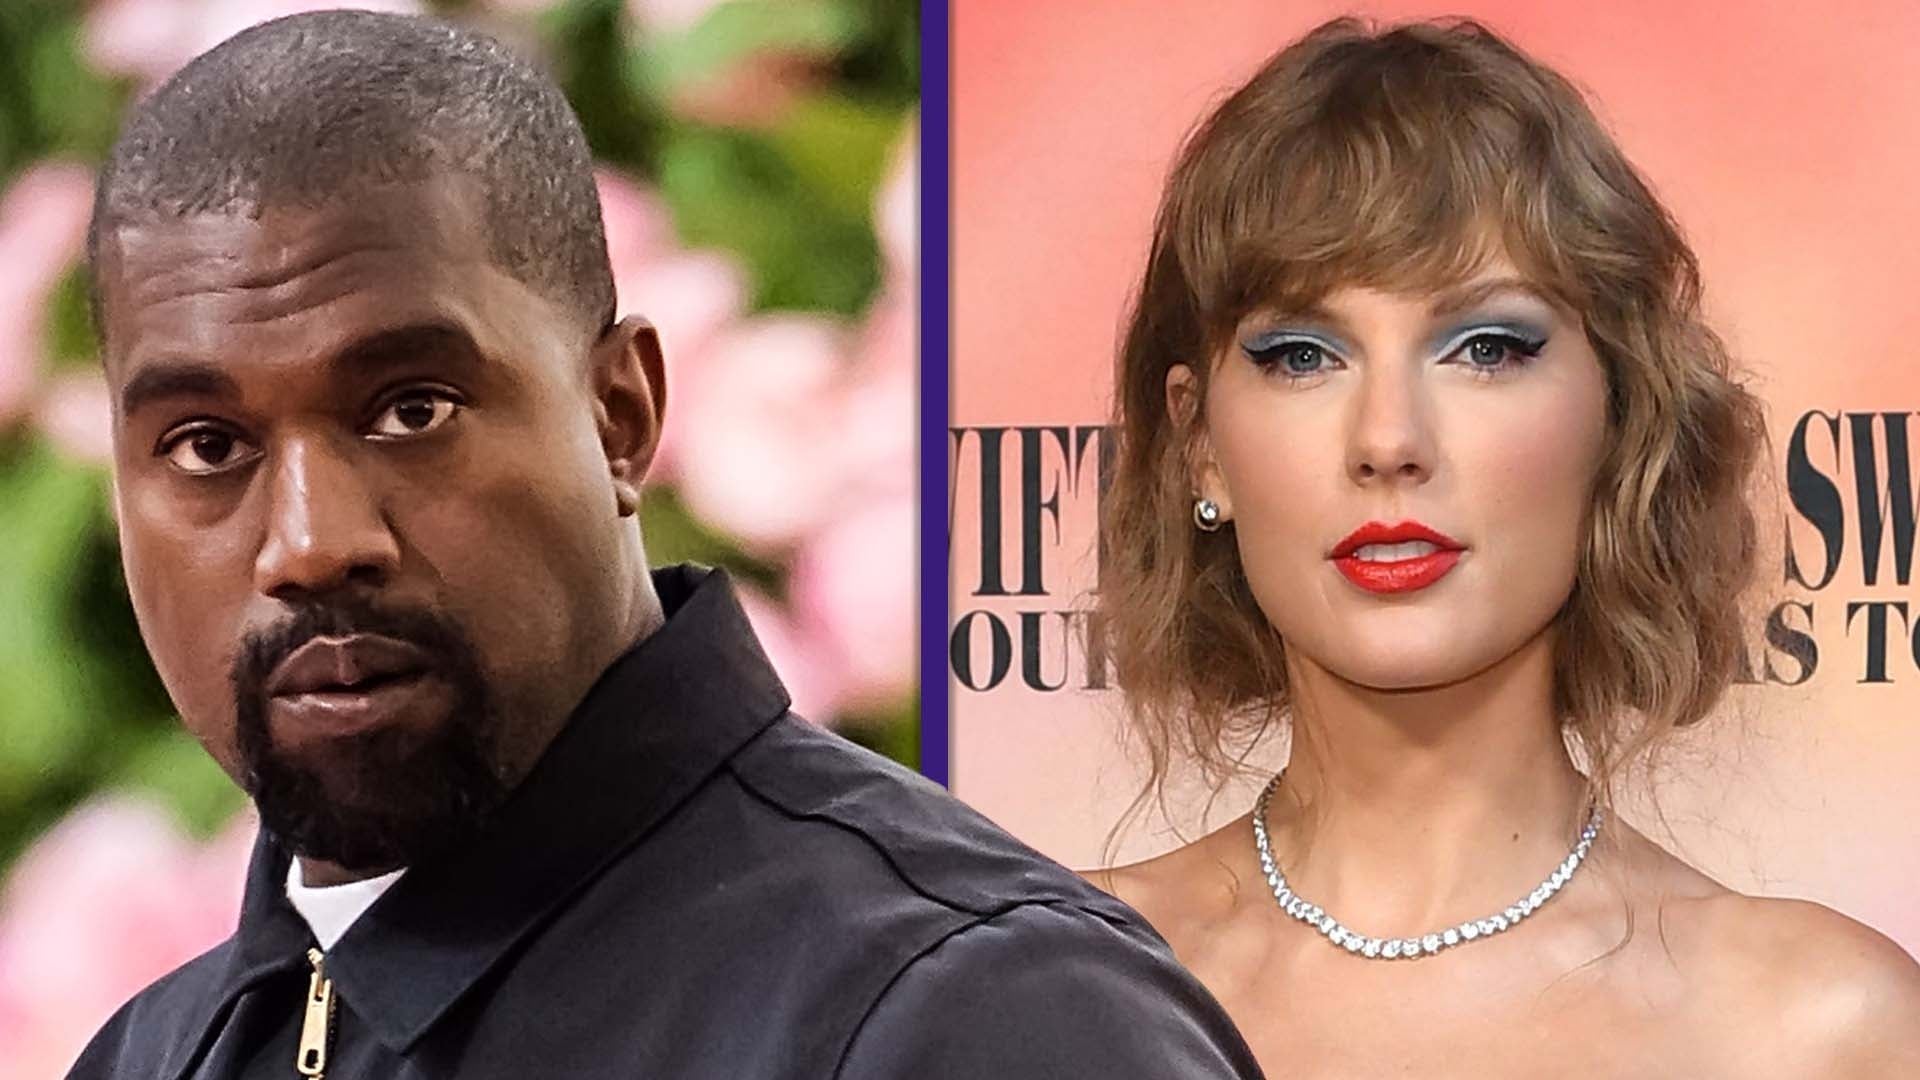 Kanye West Pleads With Taylor Swift Fans That He Is Not the Enemy